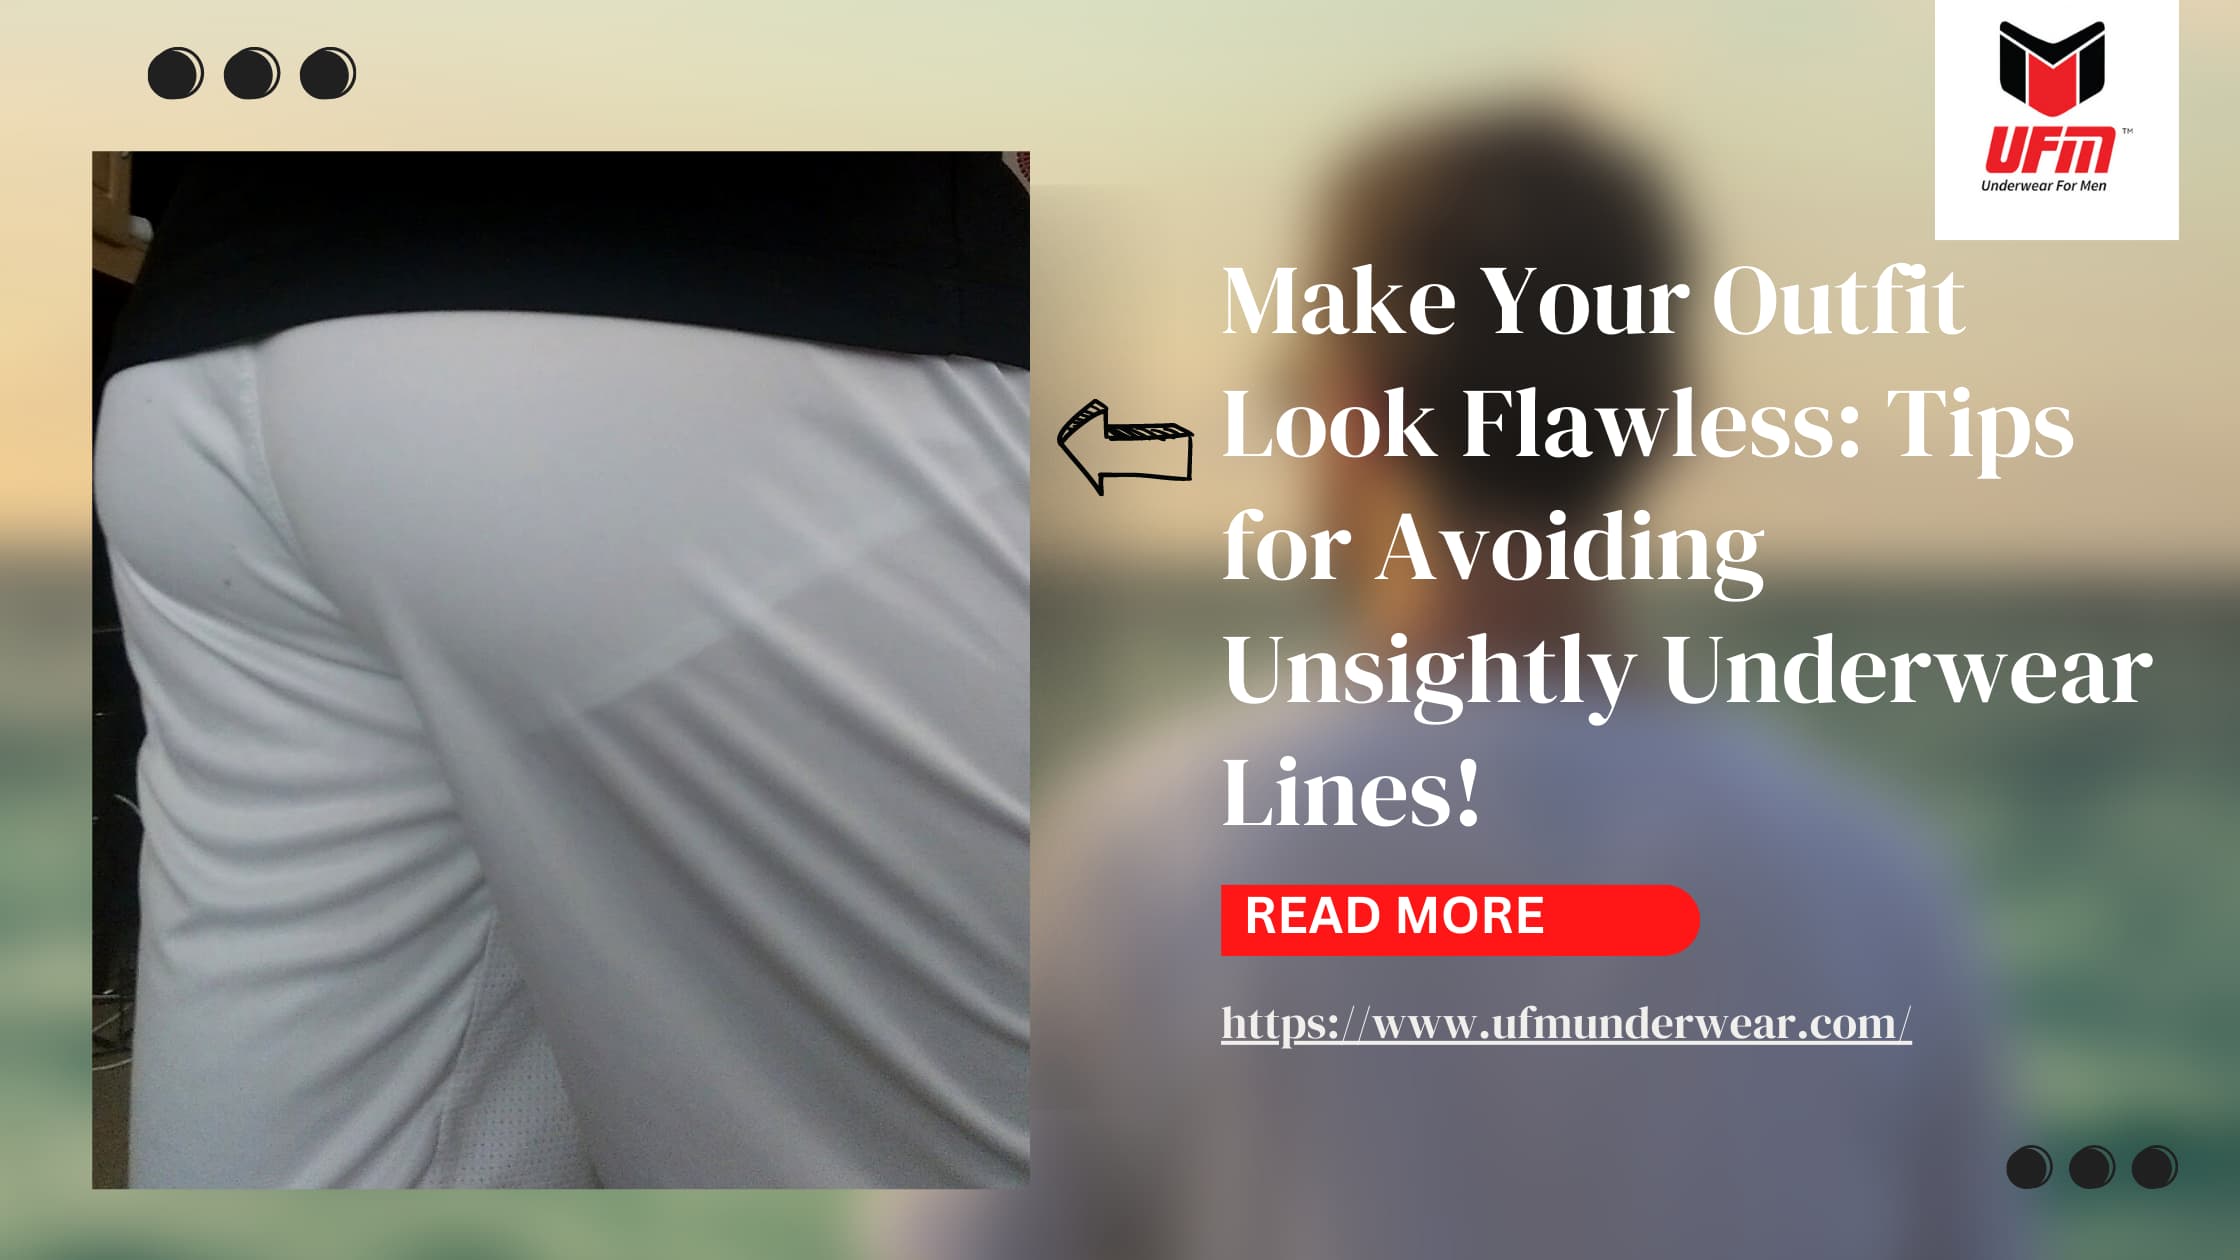 Tips for Avoiding Unsightly Underwear Lines